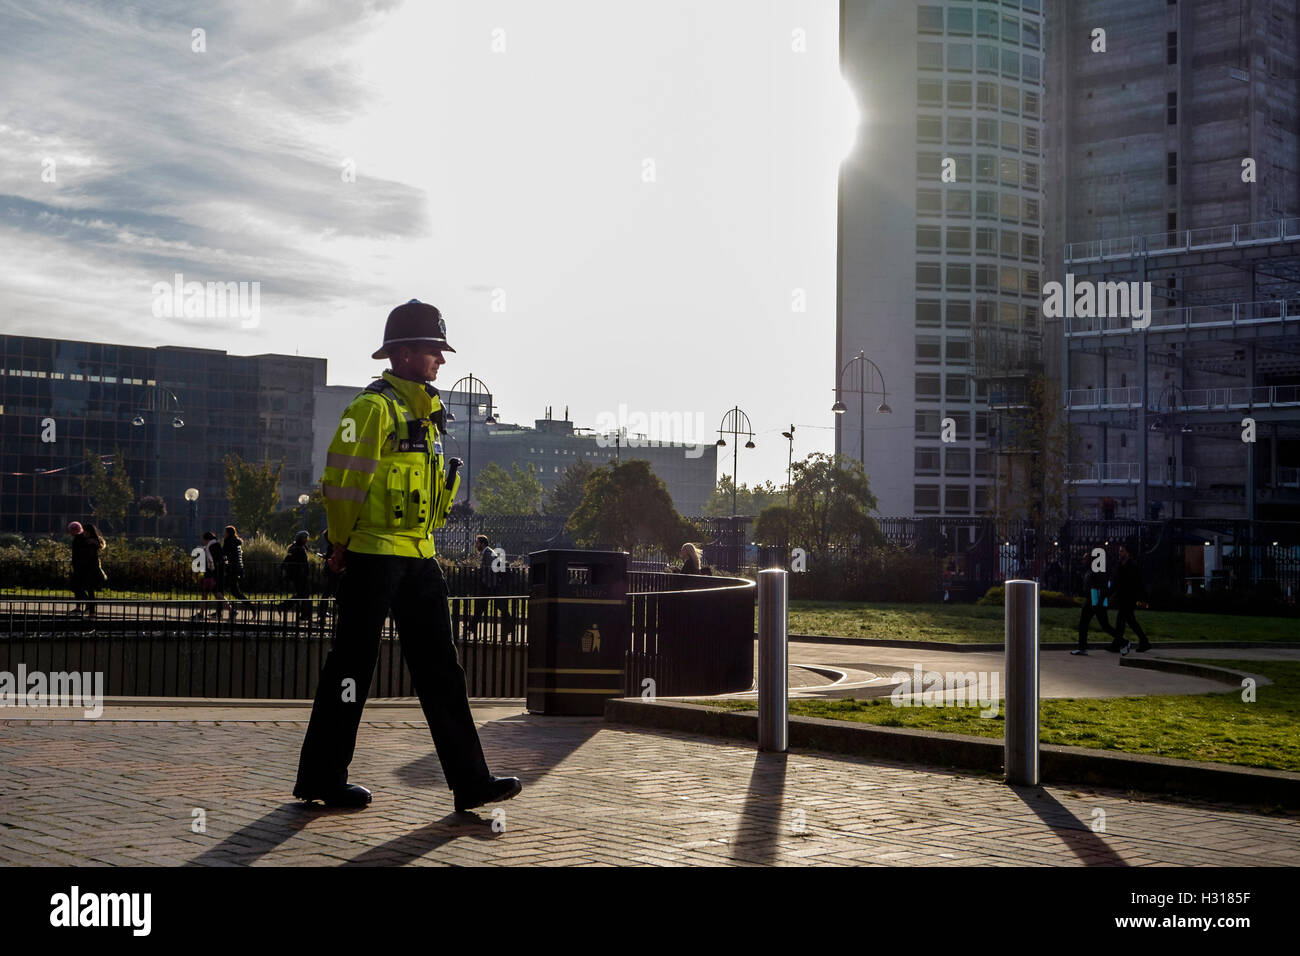 Conservative Party Conference day 2 on 03/10/2016 at Birmingham ICC, Birmingham. Persons pictured: Atmosphere, general views in and around the ICC with the highly visible security . Picture by Julie Edwards. Stock Photo